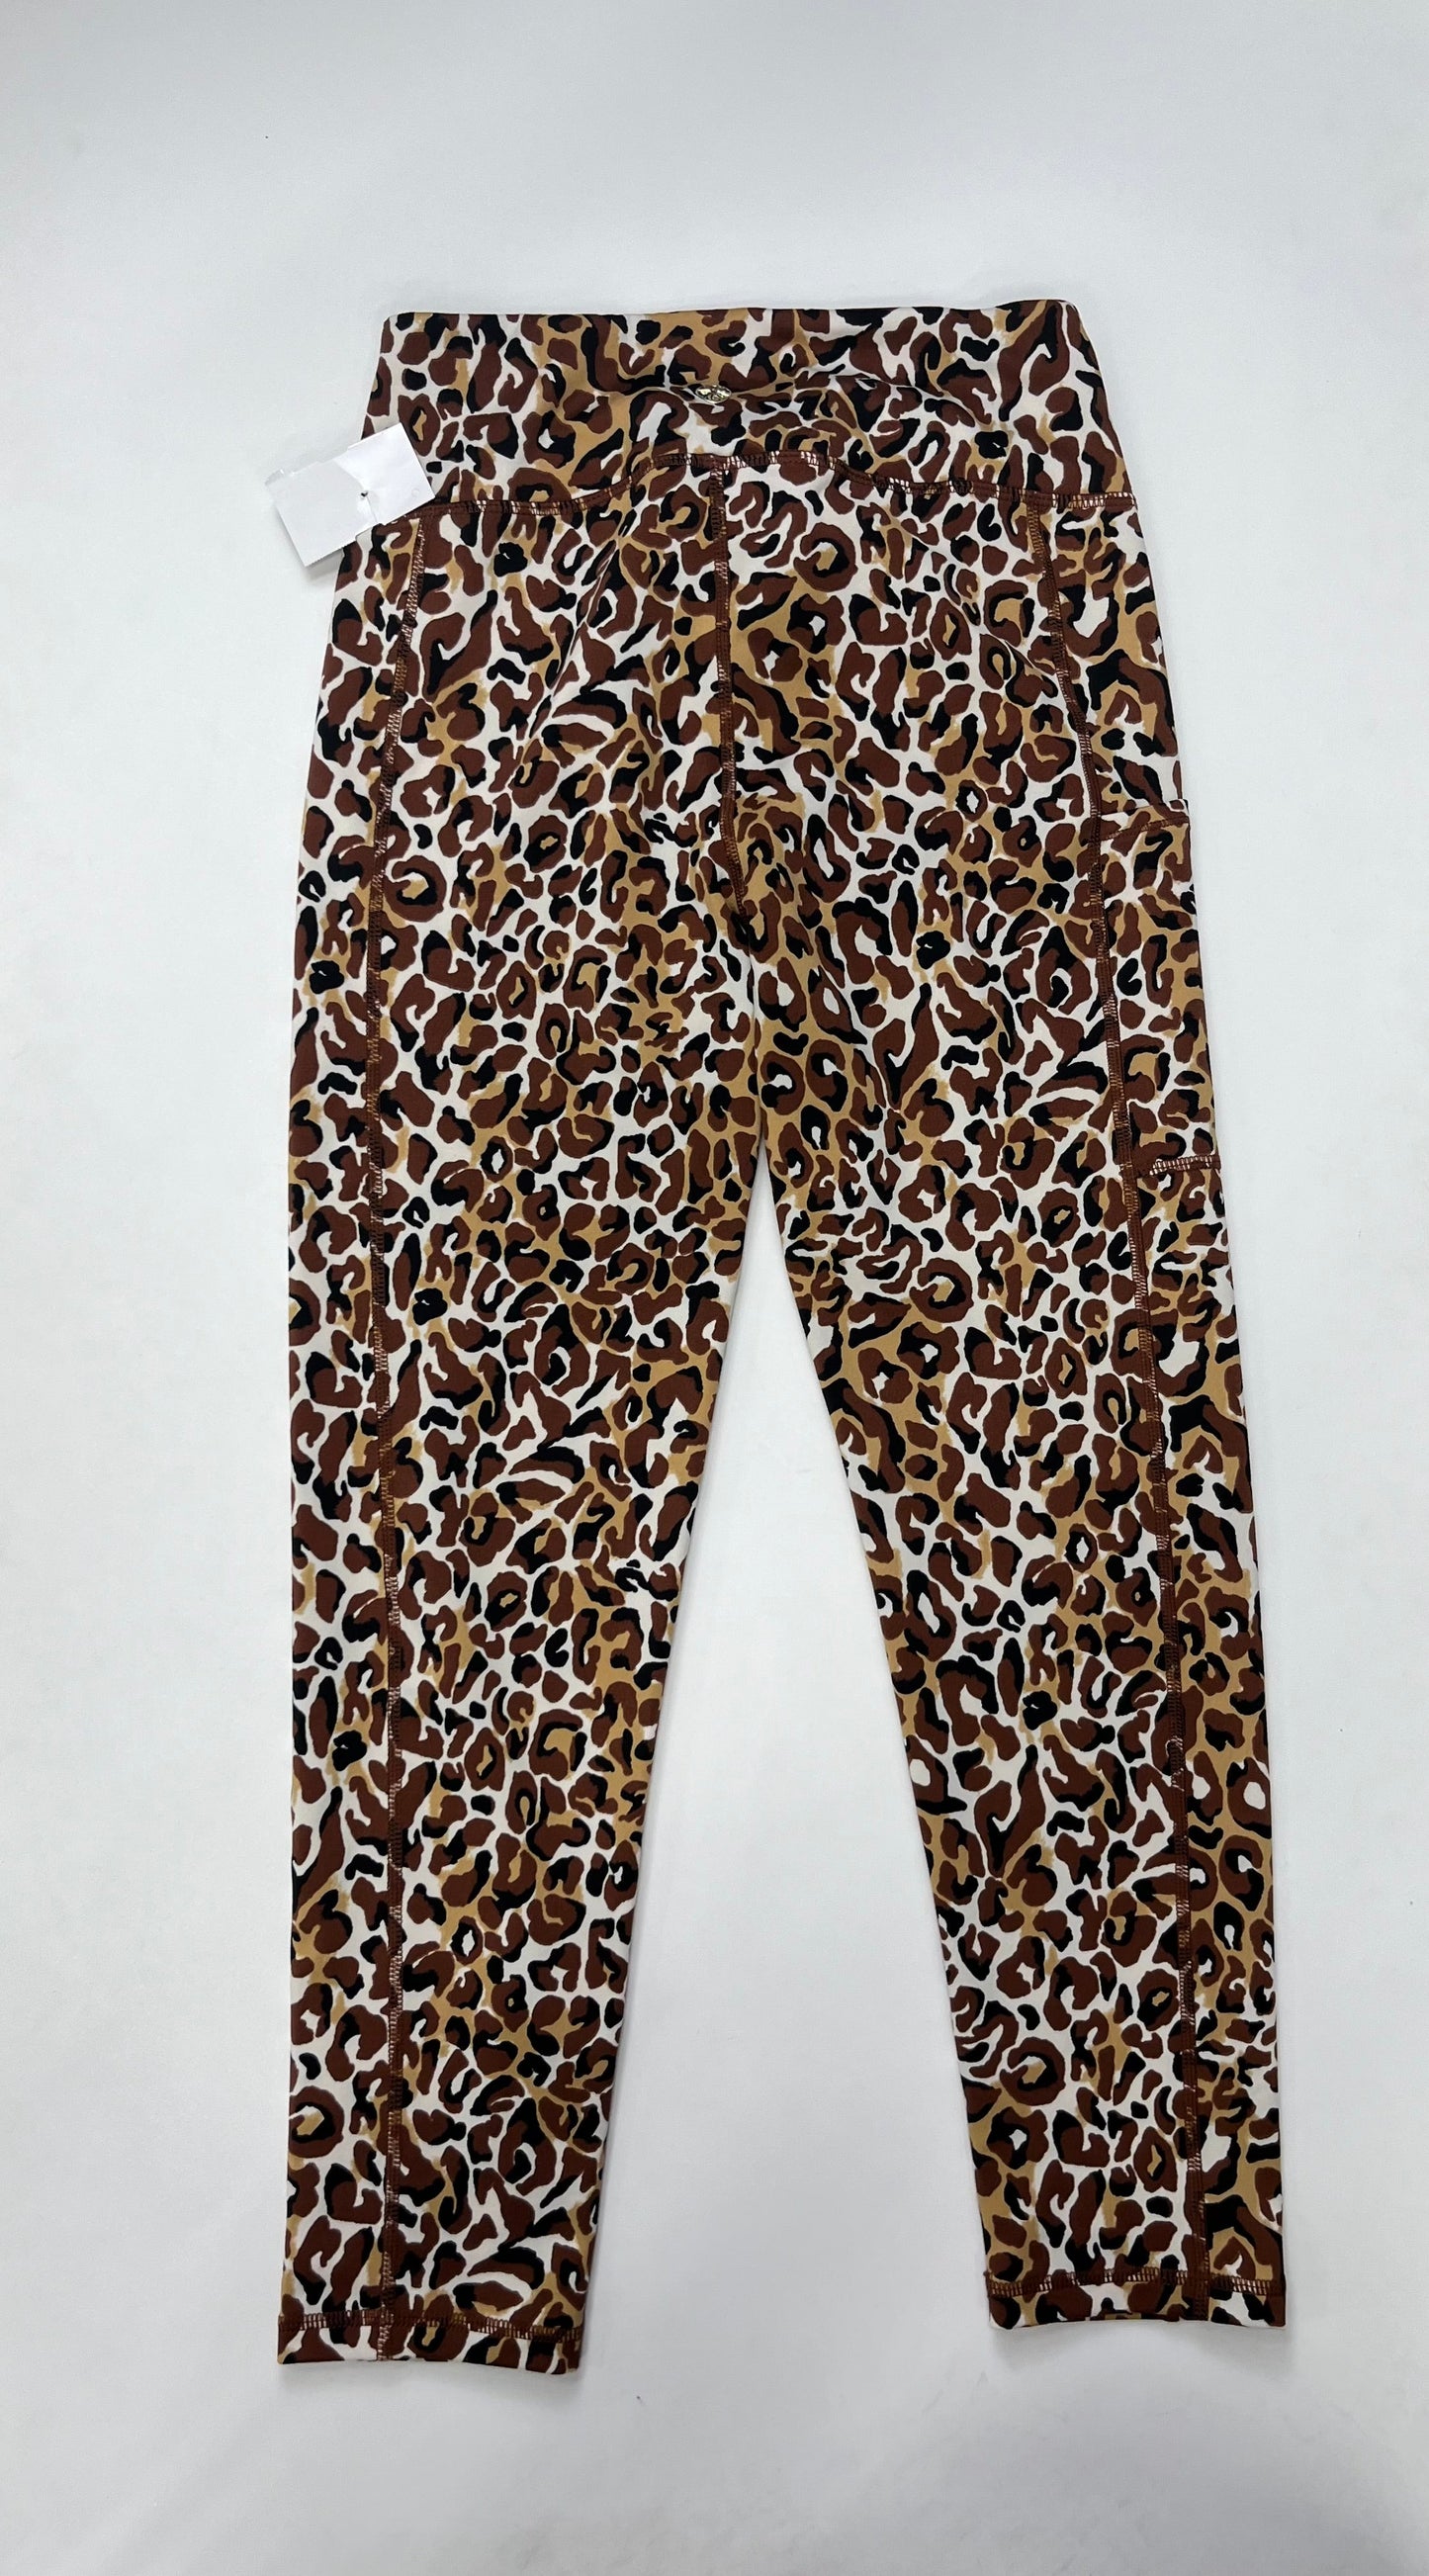 Animal Print Athletic Leggings Lilly Pulitzer, Size S